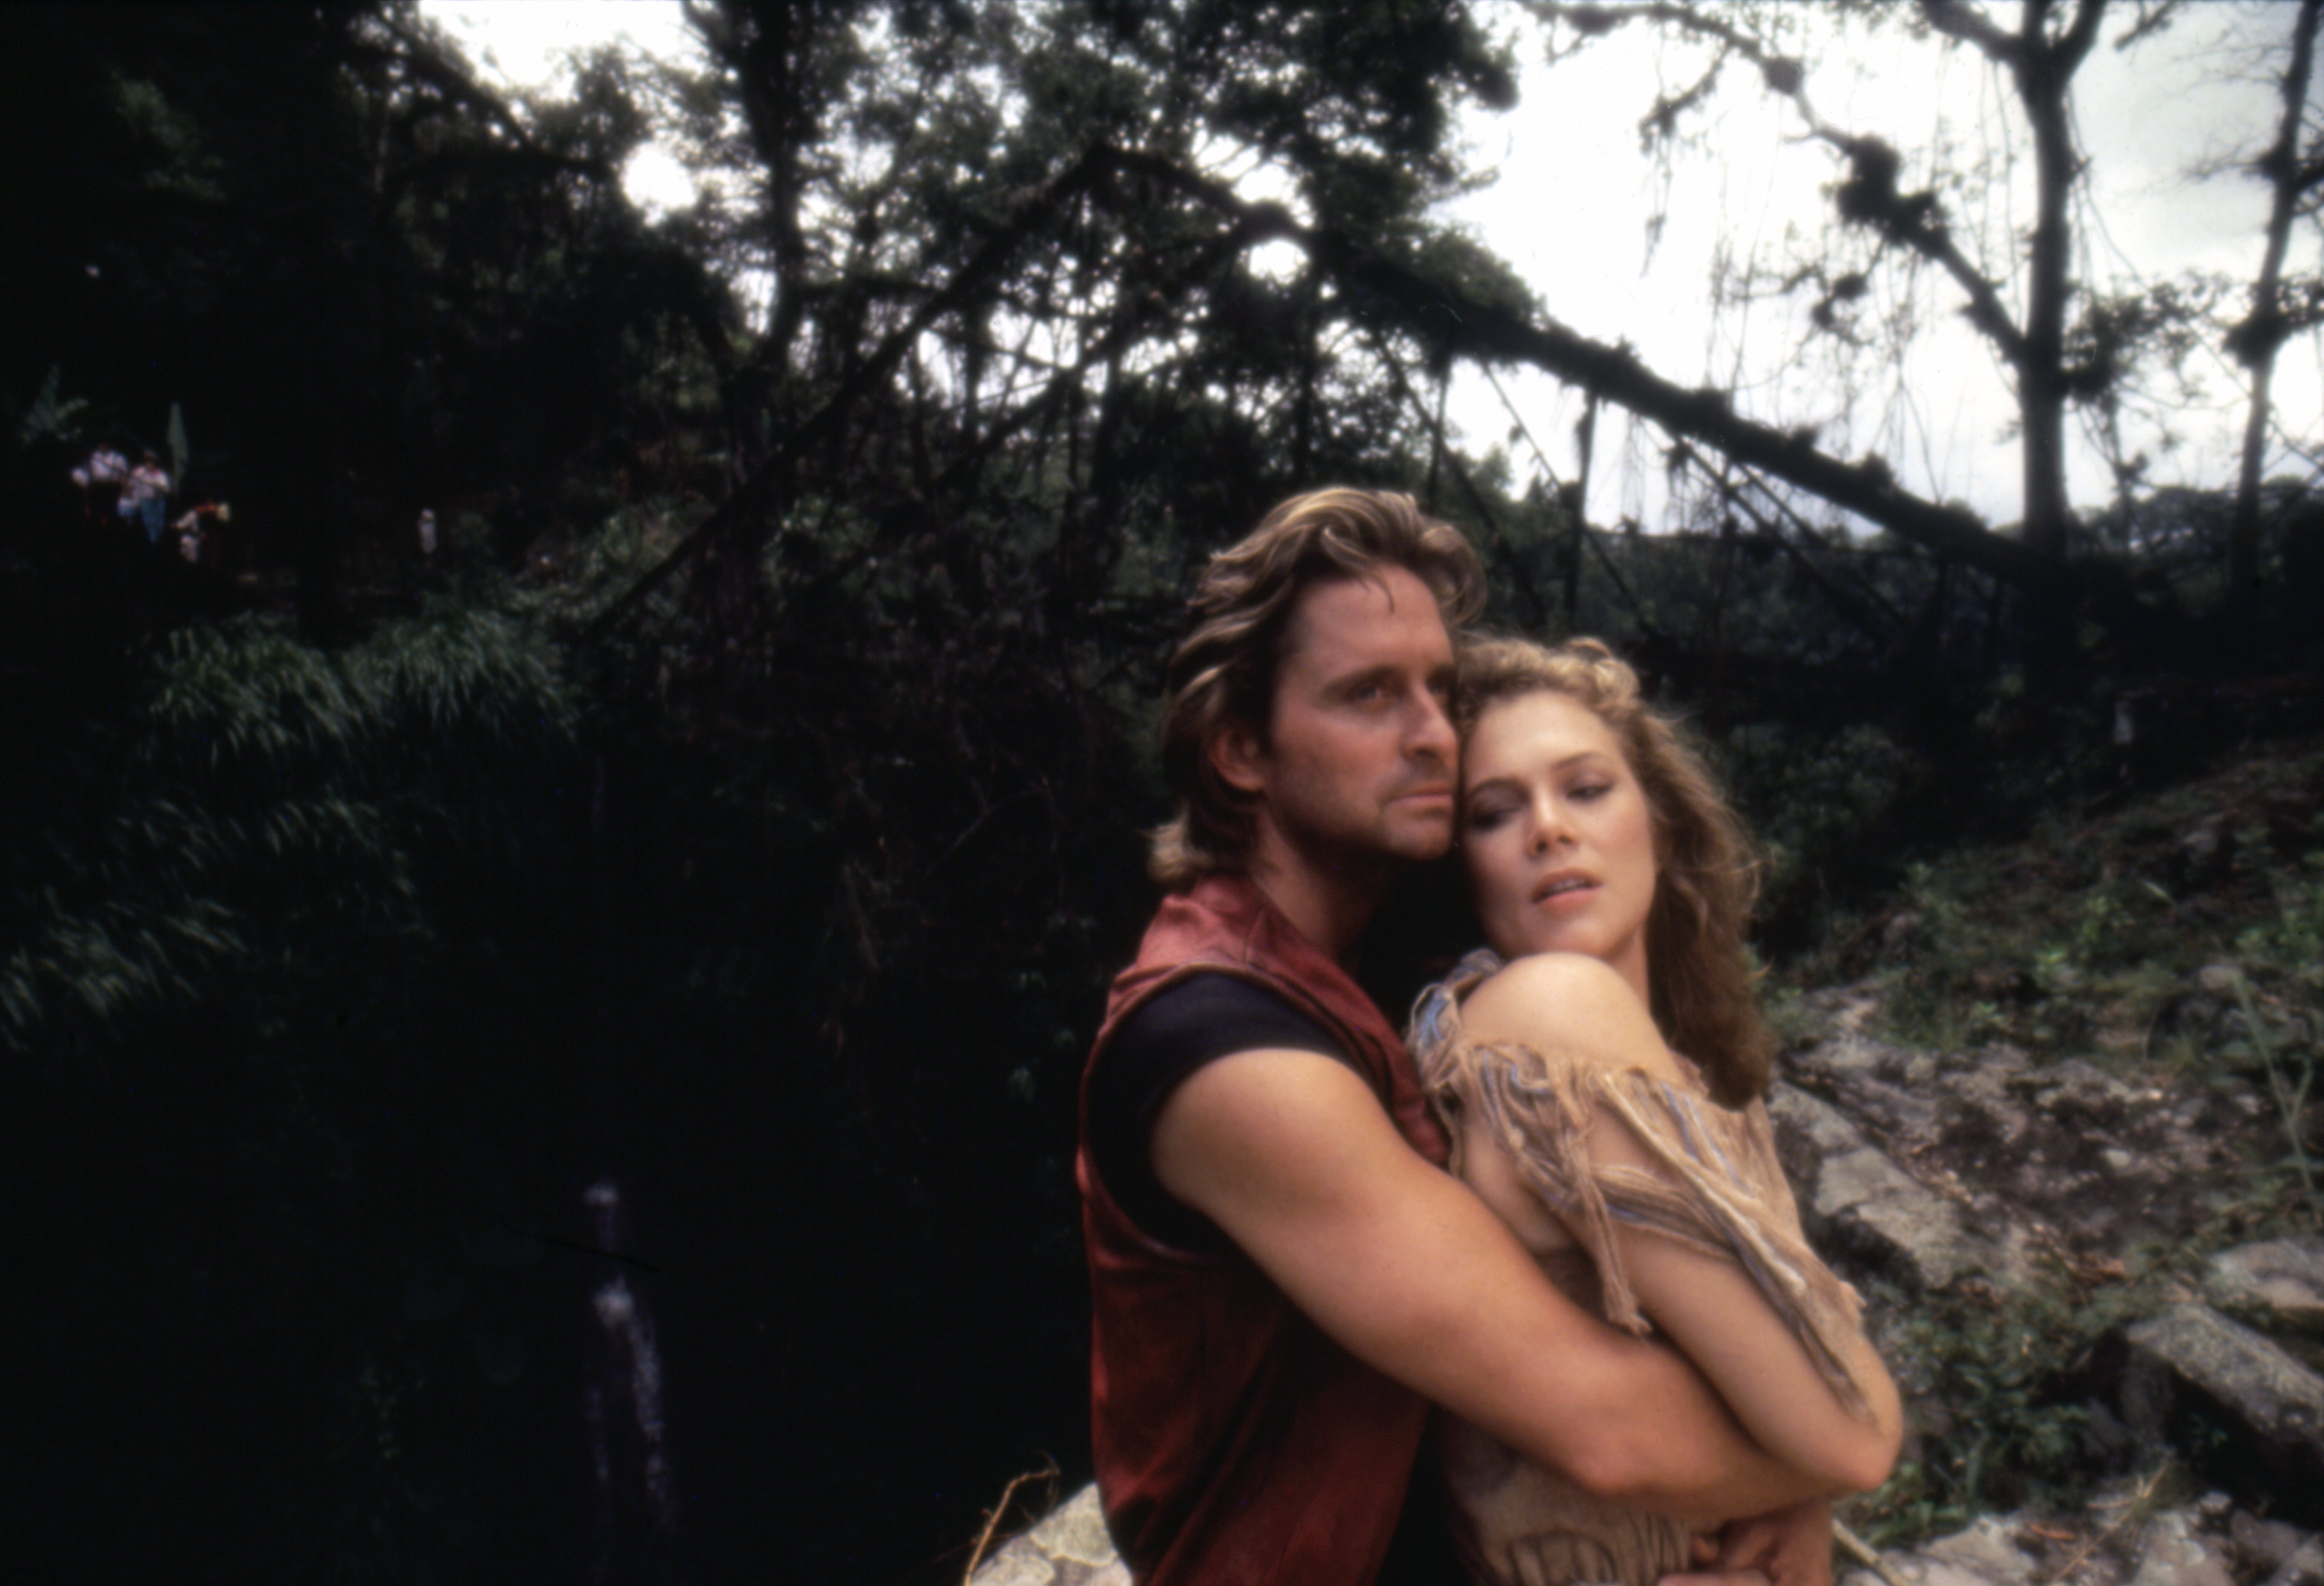 Michael Douglas and Kathleen Turner pictured in an embrace in the adventure film "Romancing the Stone." | Source: Getty Images